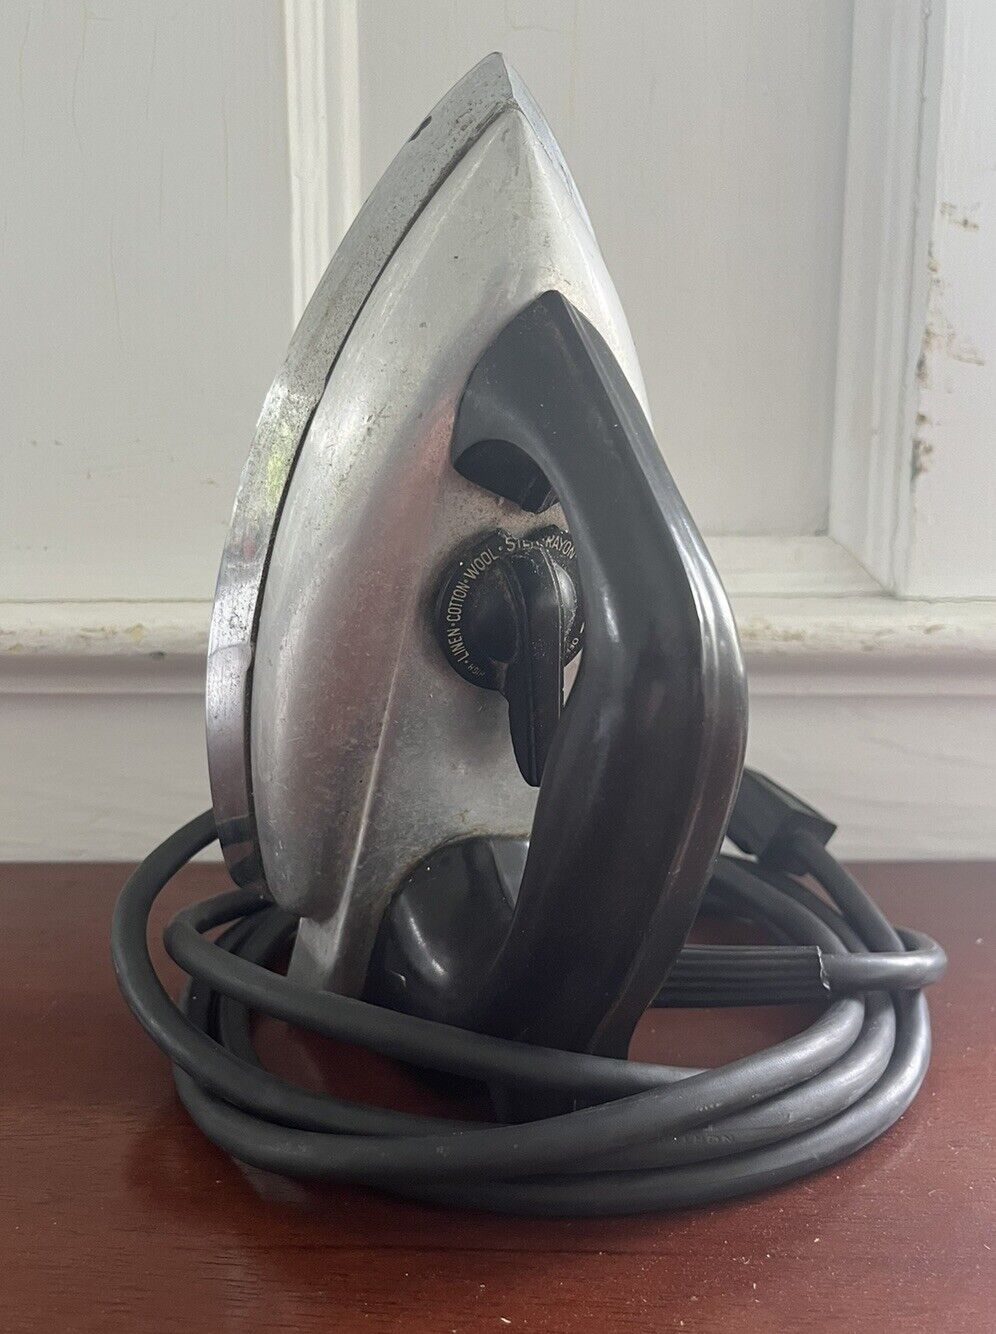 Vintage Westinghouse Automatic Steam Iron - LPC-414C - 115V 1000W - Tested/Works